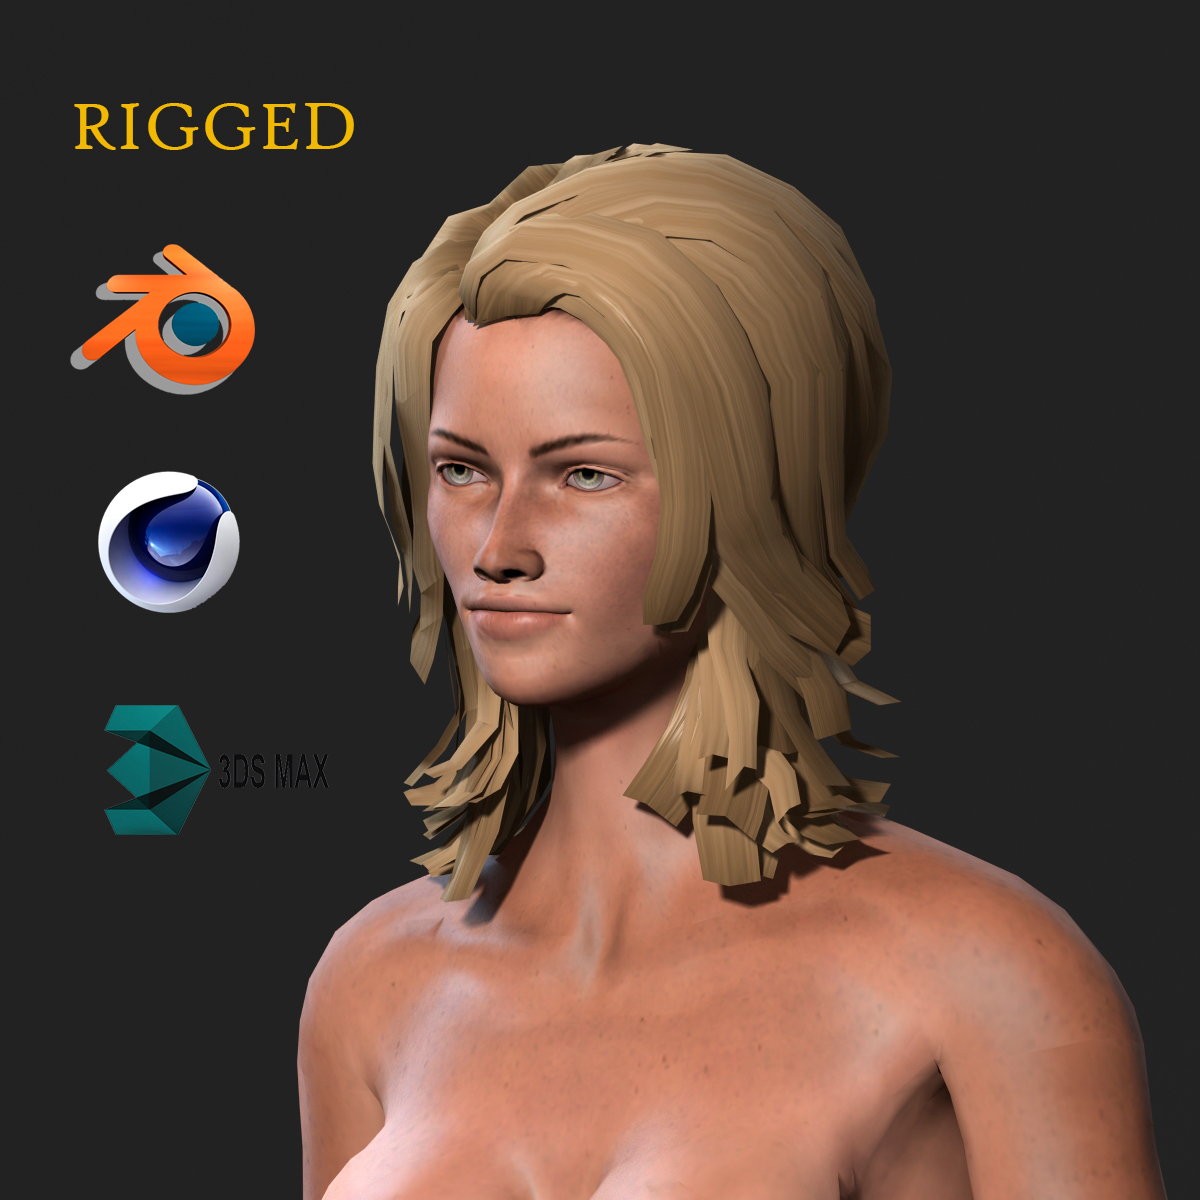 Beautiful Naked Woman Rigged 3d Game Character Low Poly 3d Model Cad Files Dwg Files Plans